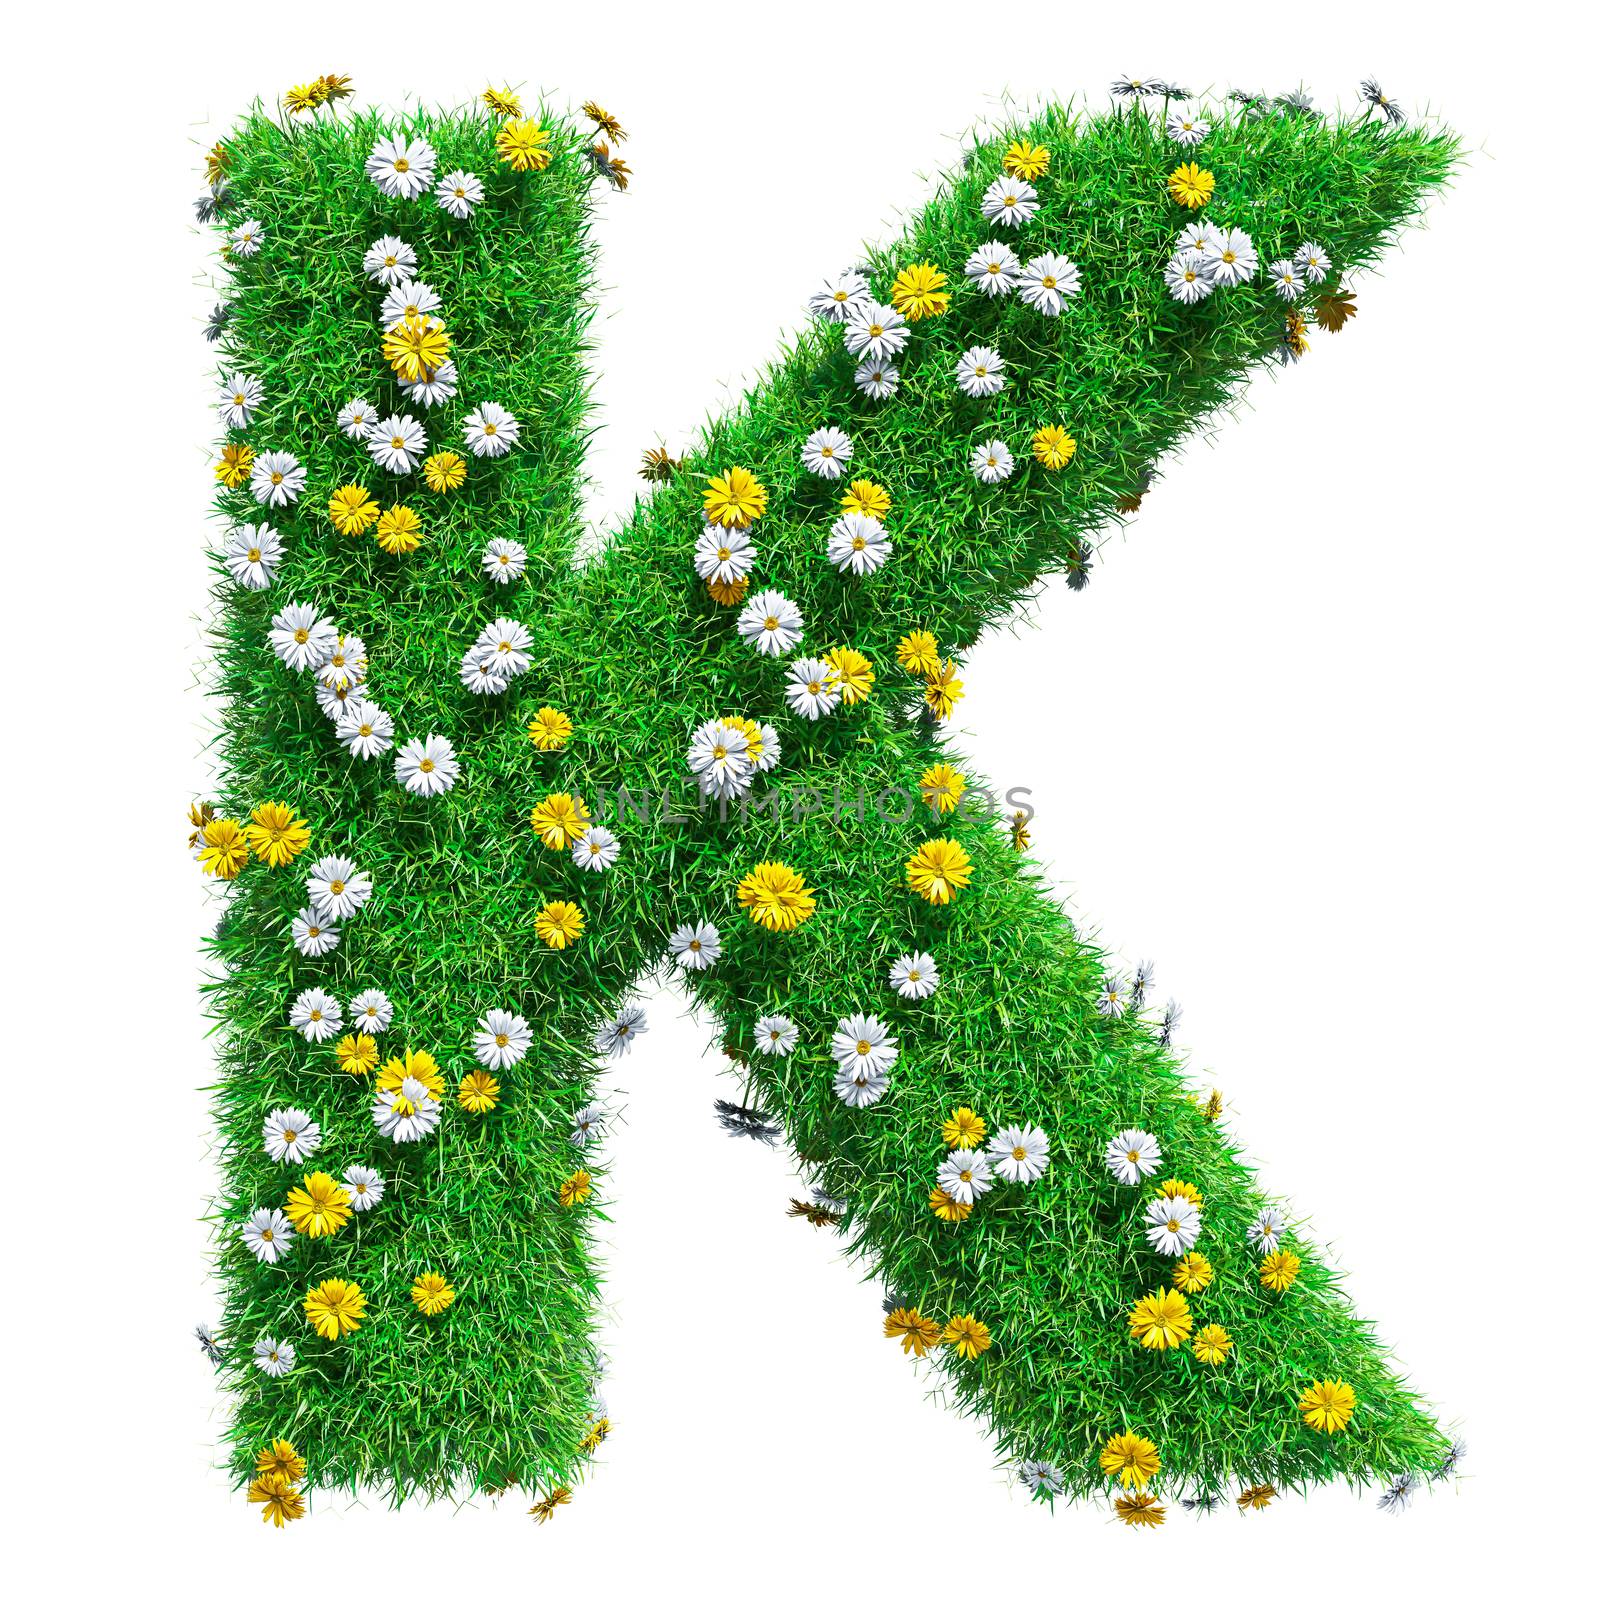 Letter K Of Green Grass And Flowers by cherezoff